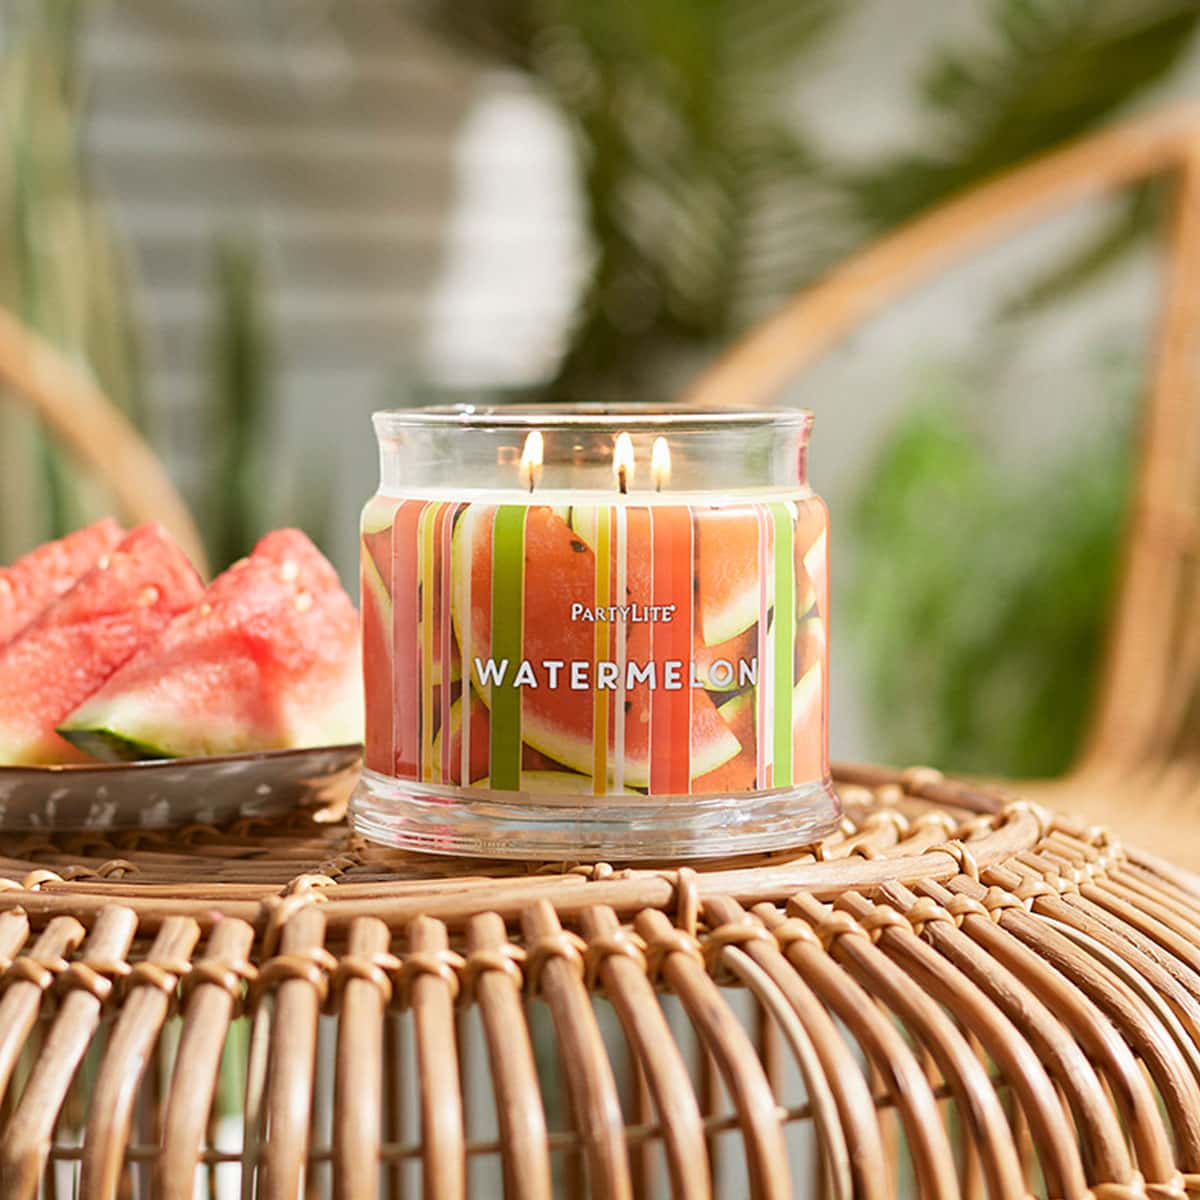 Watermelon 3-Wick Jar Candle - PartyLite US